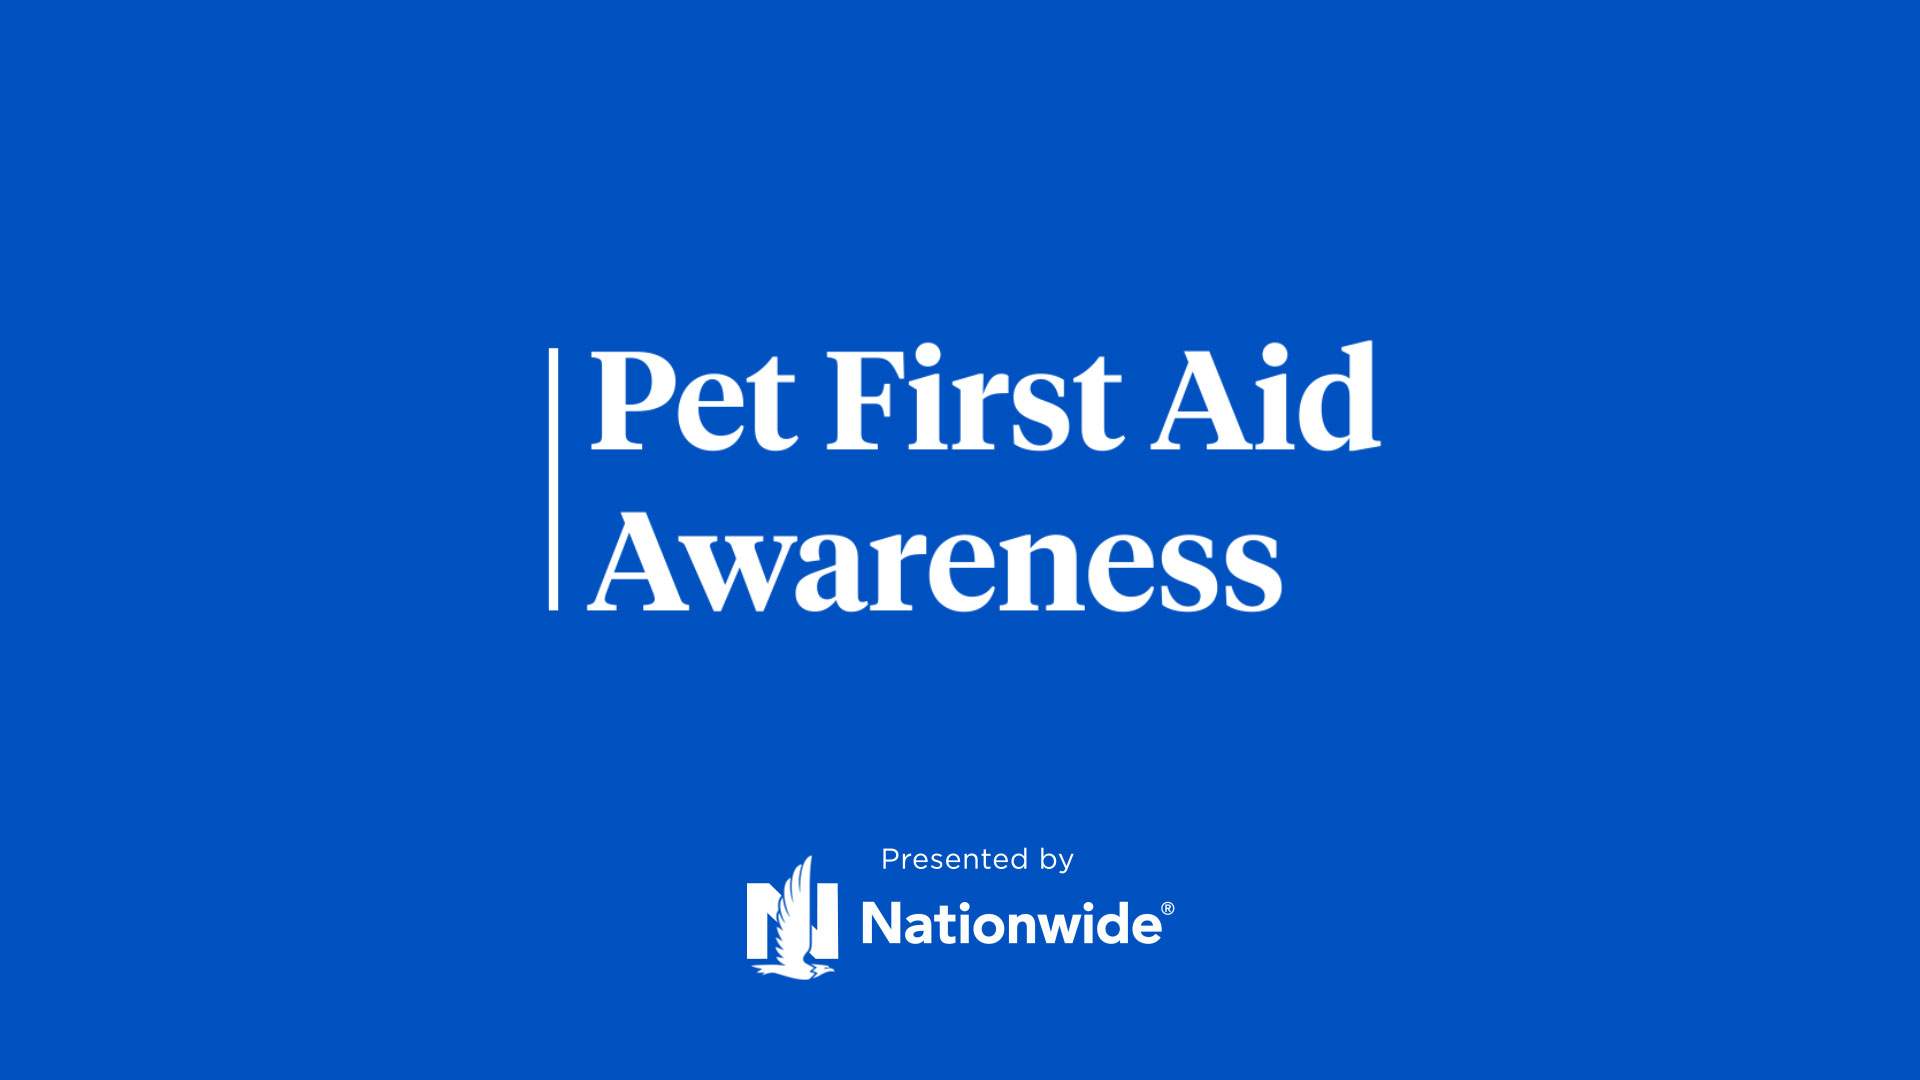 Pet First Aid Awareness presented by nationwide